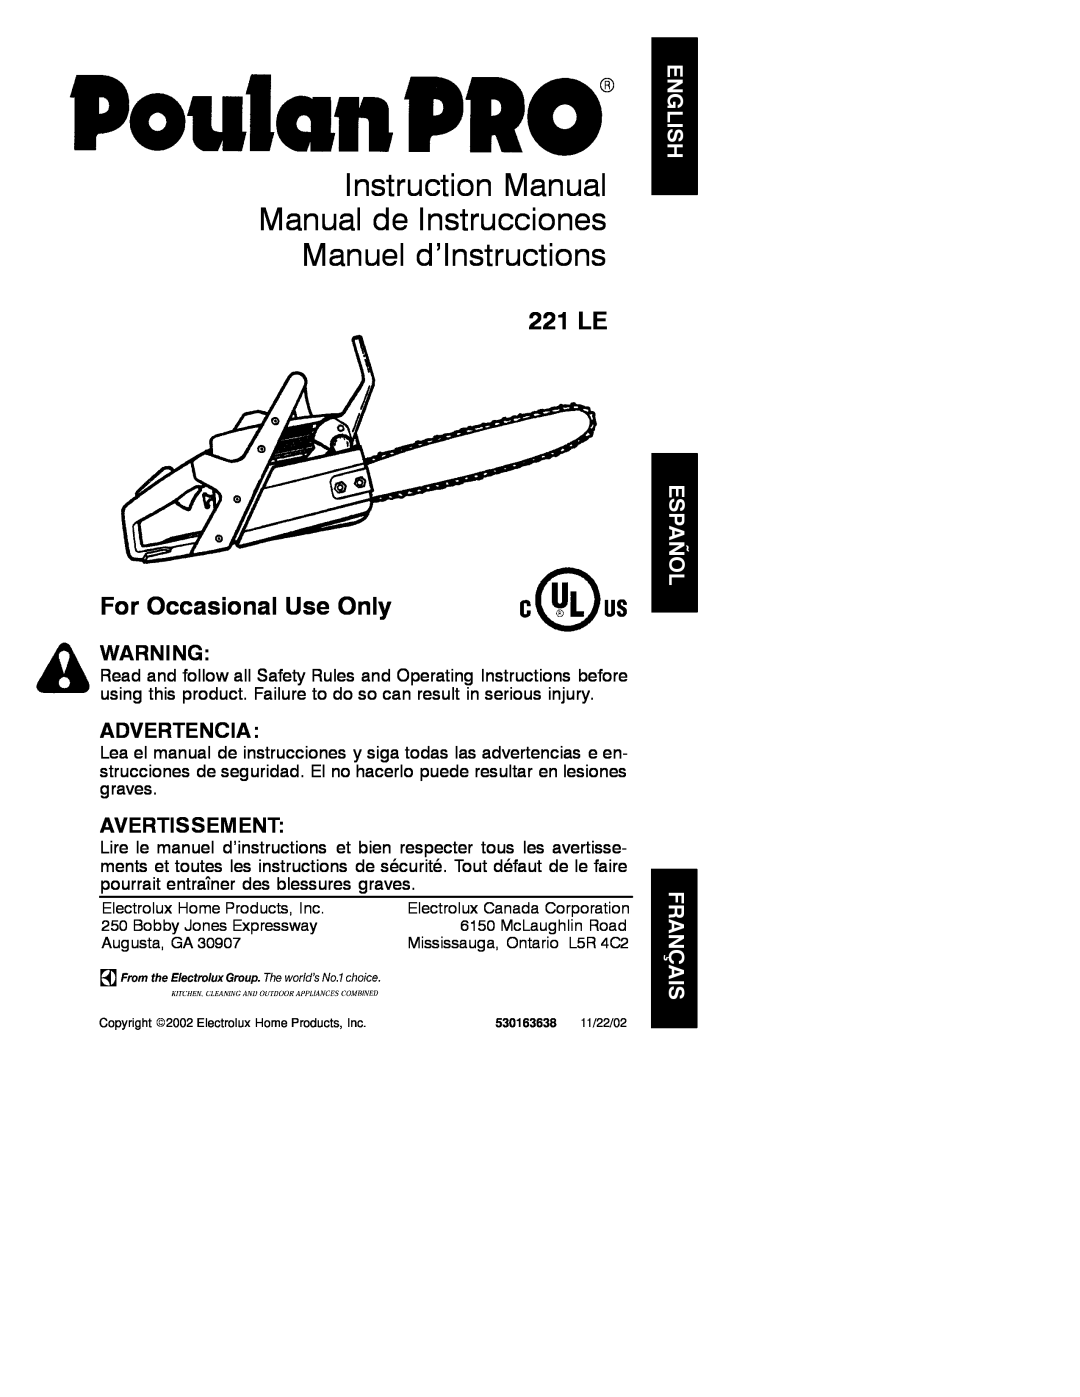 Poulan 2002-11, 530163638 instruction manual Manuel d’Instructions, LE For Occasional Use Only, Advertencia, Avertissement 